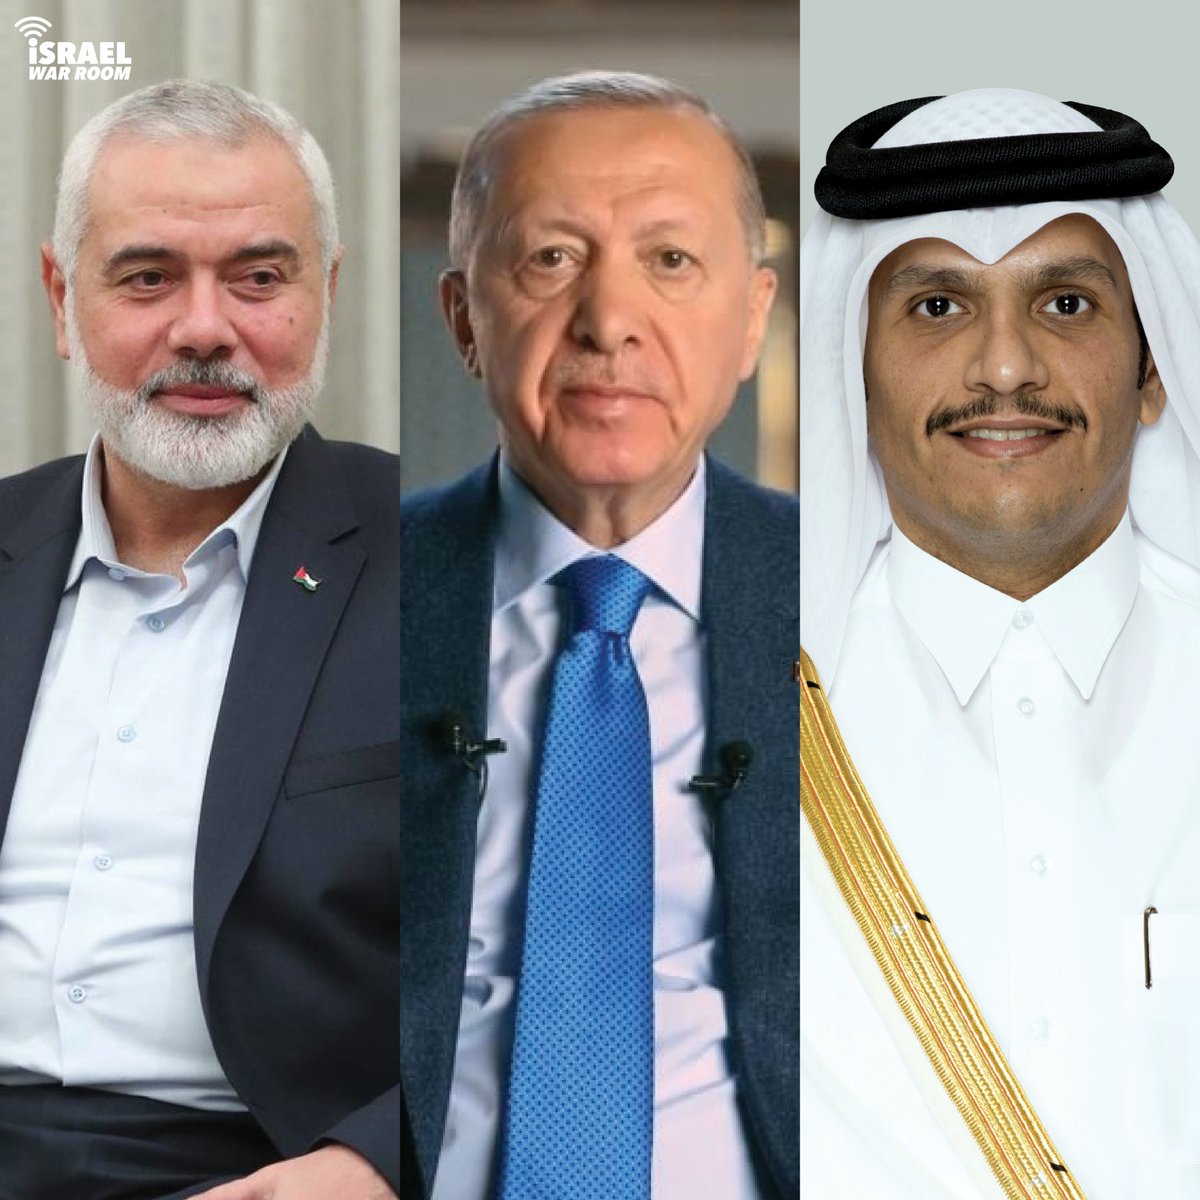 According to press statements from Hamas, Turkish President @RTErdogan and Qatari PM @MBA_AlThani_ called Hamas chief Ismail Haniyeh to express their condolences on the 'martyrdom' of his terrorist sons. Qatar and Turkey are big supporters of Hamas and should be treated as such.